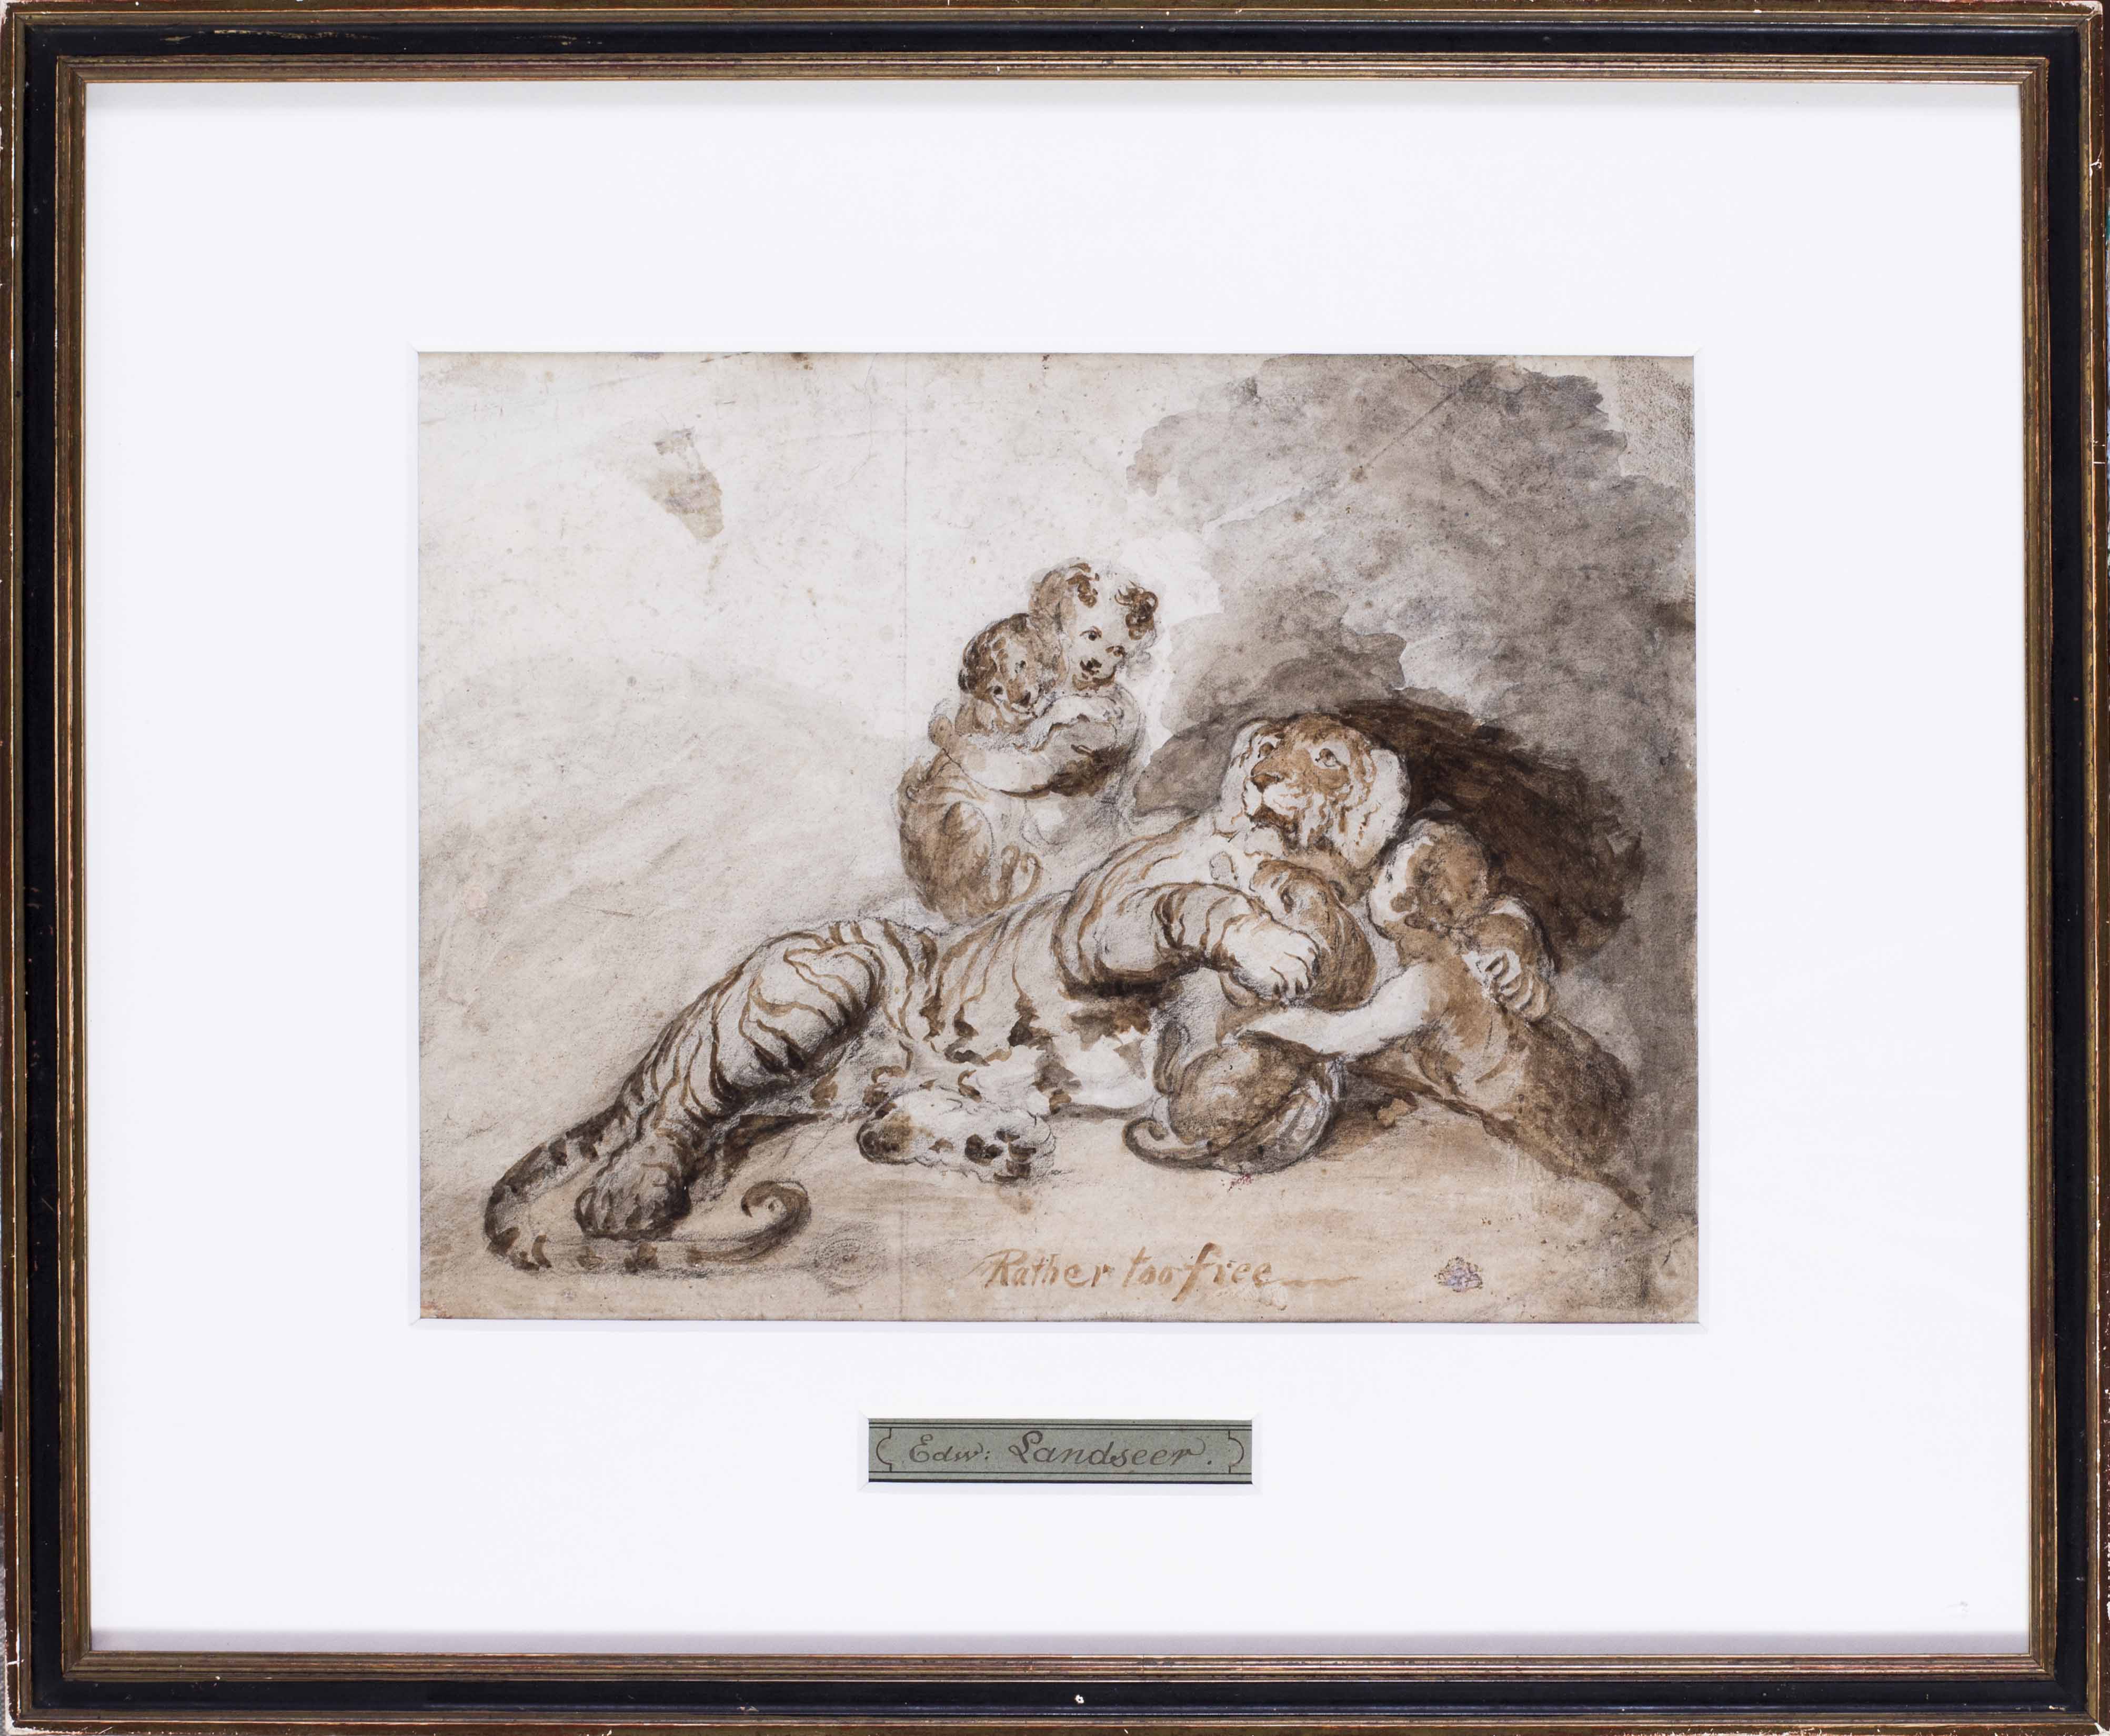 Attributed to Sir Edwin Henry Landseer (British, 1802-1873) Rather too free - Image 2 of 8